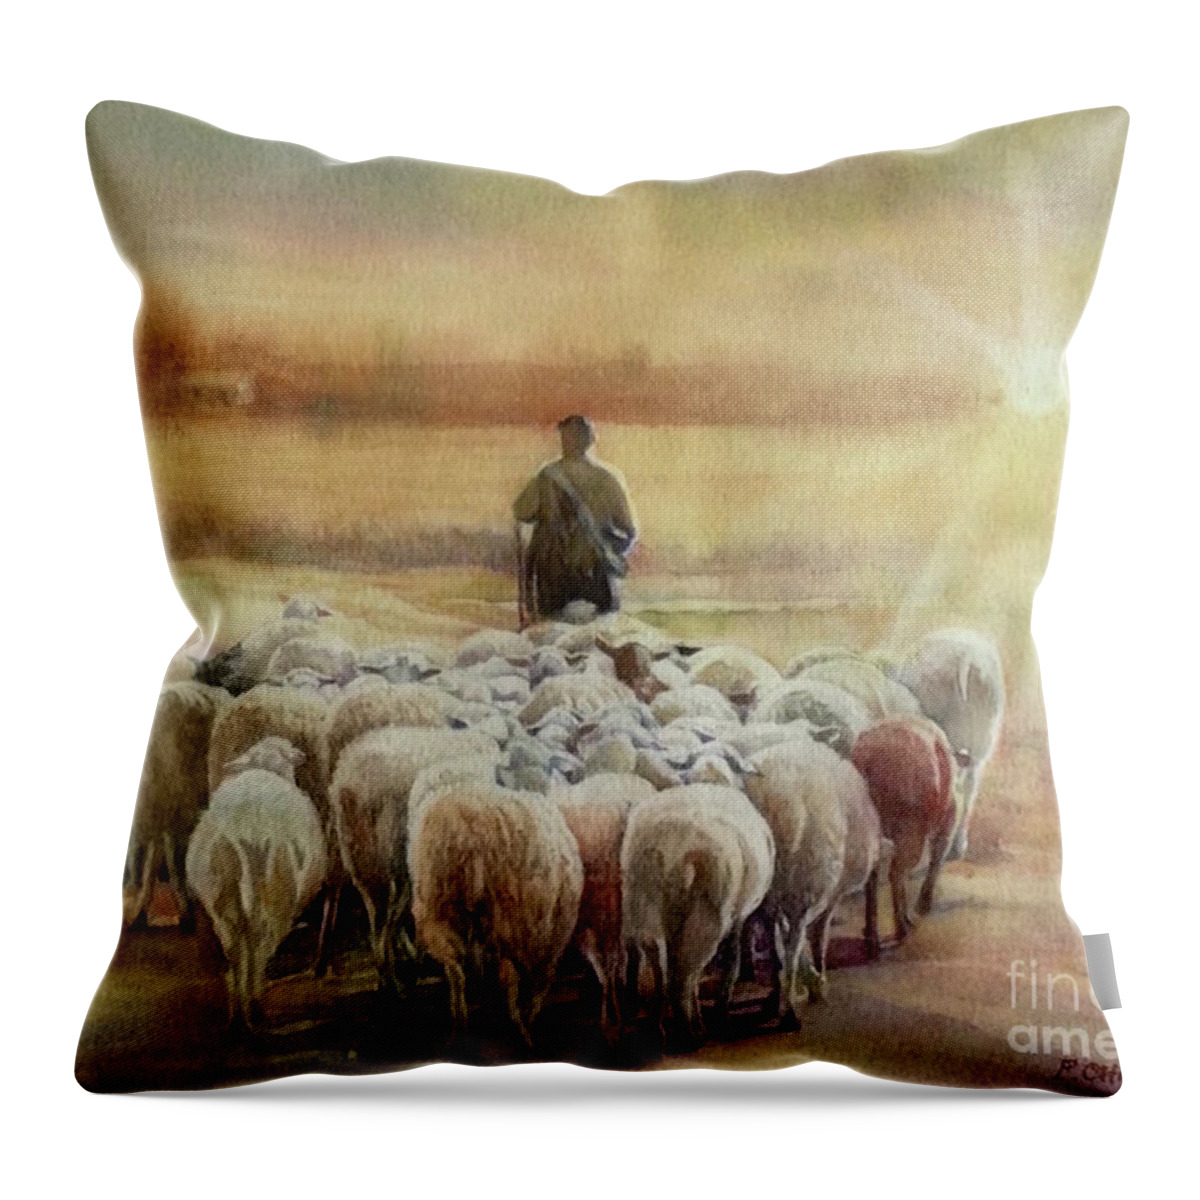 Mouton Throw Pillow featuring the painting Correze by Francoise Chauray